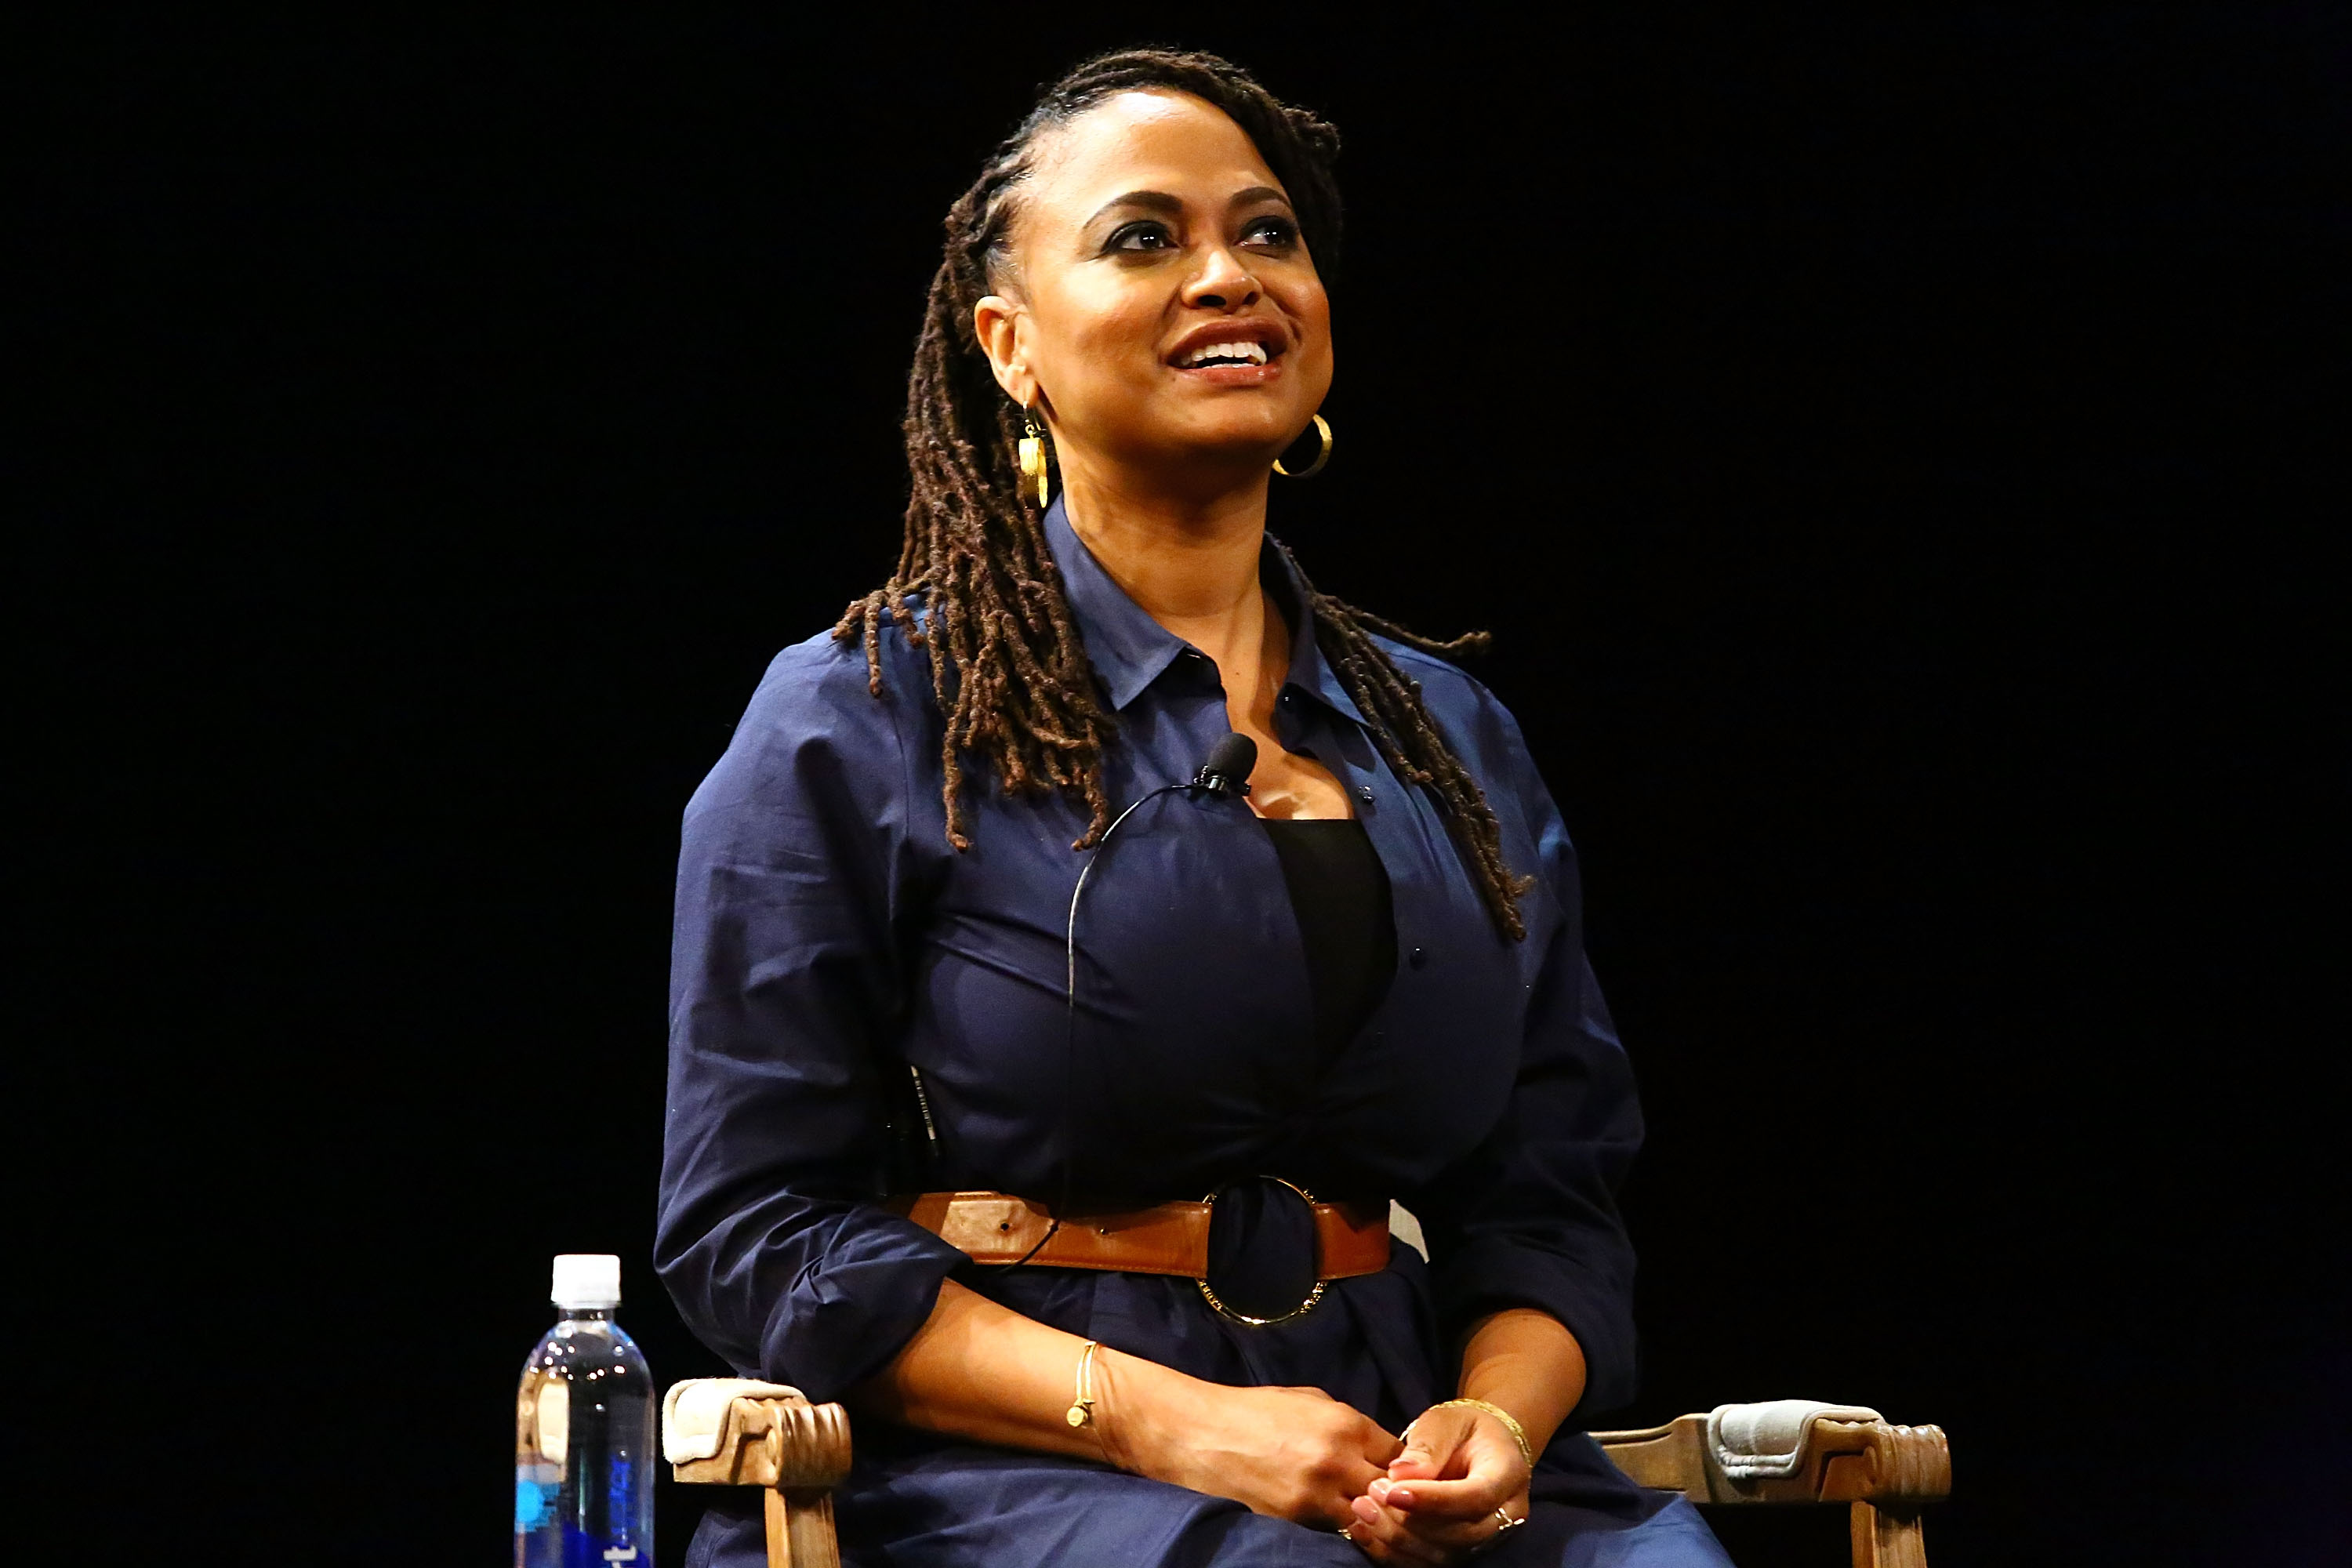 Ava DuVernay Doesn't Want "Diversity" To Be Part Of The #Osc